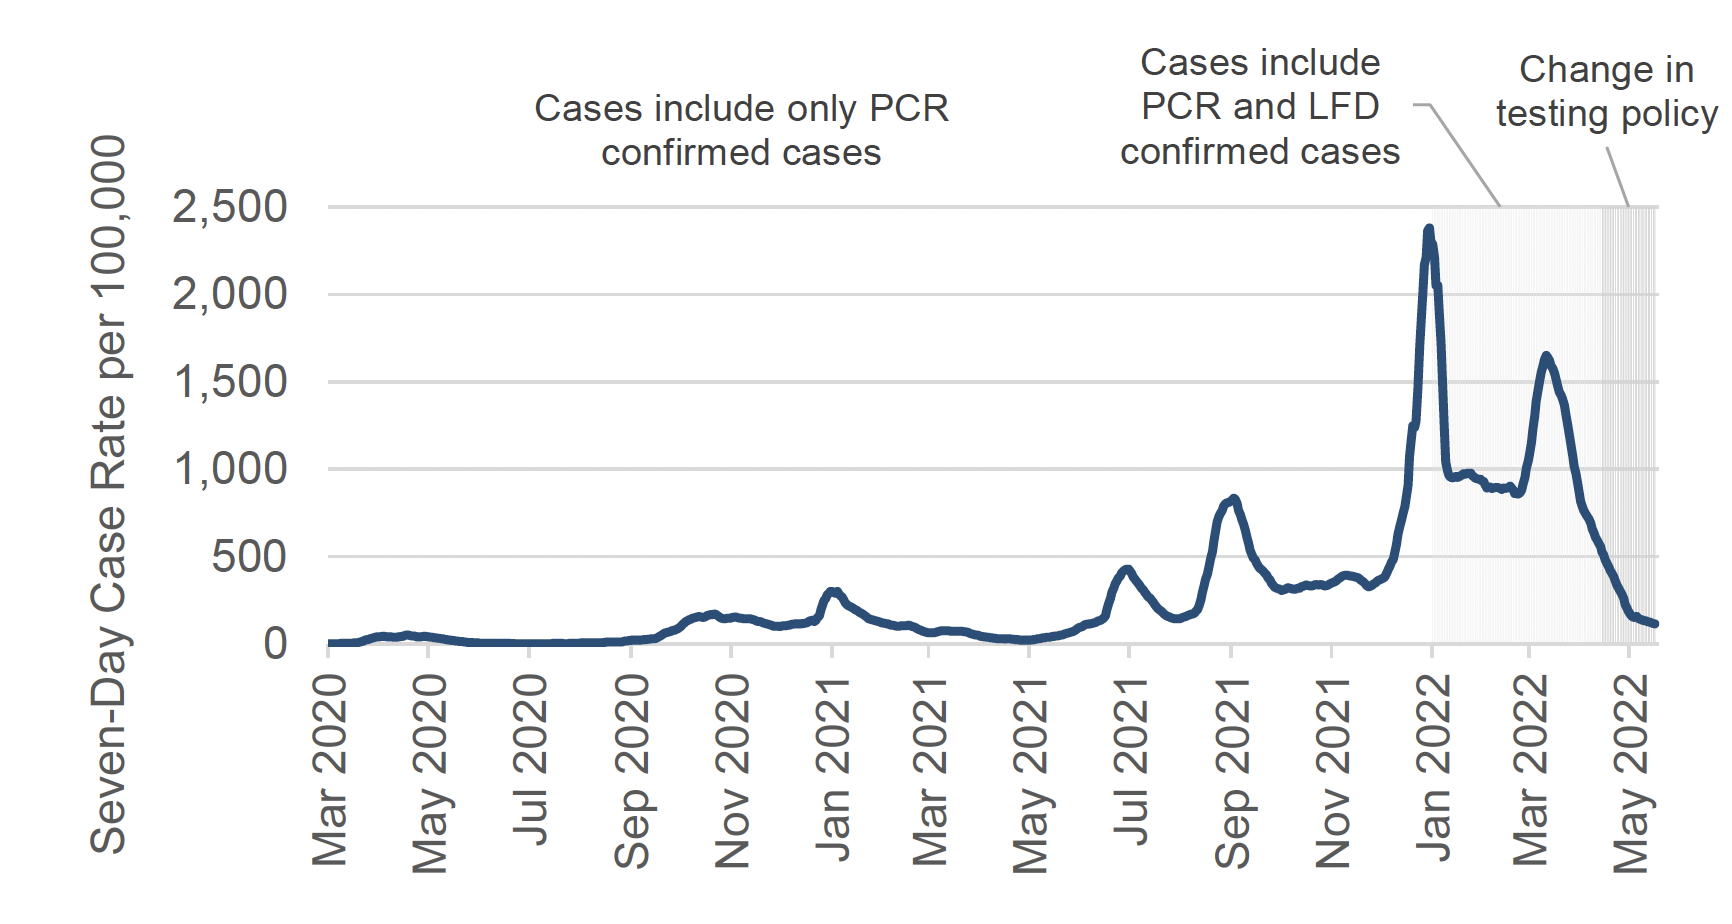 a line graph showing the seven-day case rate (including reinfections) by specimen date per 100,000 people in Scotland, using data from March 2020 up to and including May 2022. In this period, weekly case rates have peaked in January 2021, July 2021, September 2021, early January 2022, and mid-March 2022. The chart has notes explaining that before 5 January 2022, the case rate includes only positive laboratory confirmed PCR tests. After 5 January 2022, the case rate includes PCR and LFD confirmed cases. From 1 May 2022, there is a change in Testing Policy meaning the purpose of COVID-19 testing shifted from population-wide testing to reduce transmission, to targeted testing and surveillance.